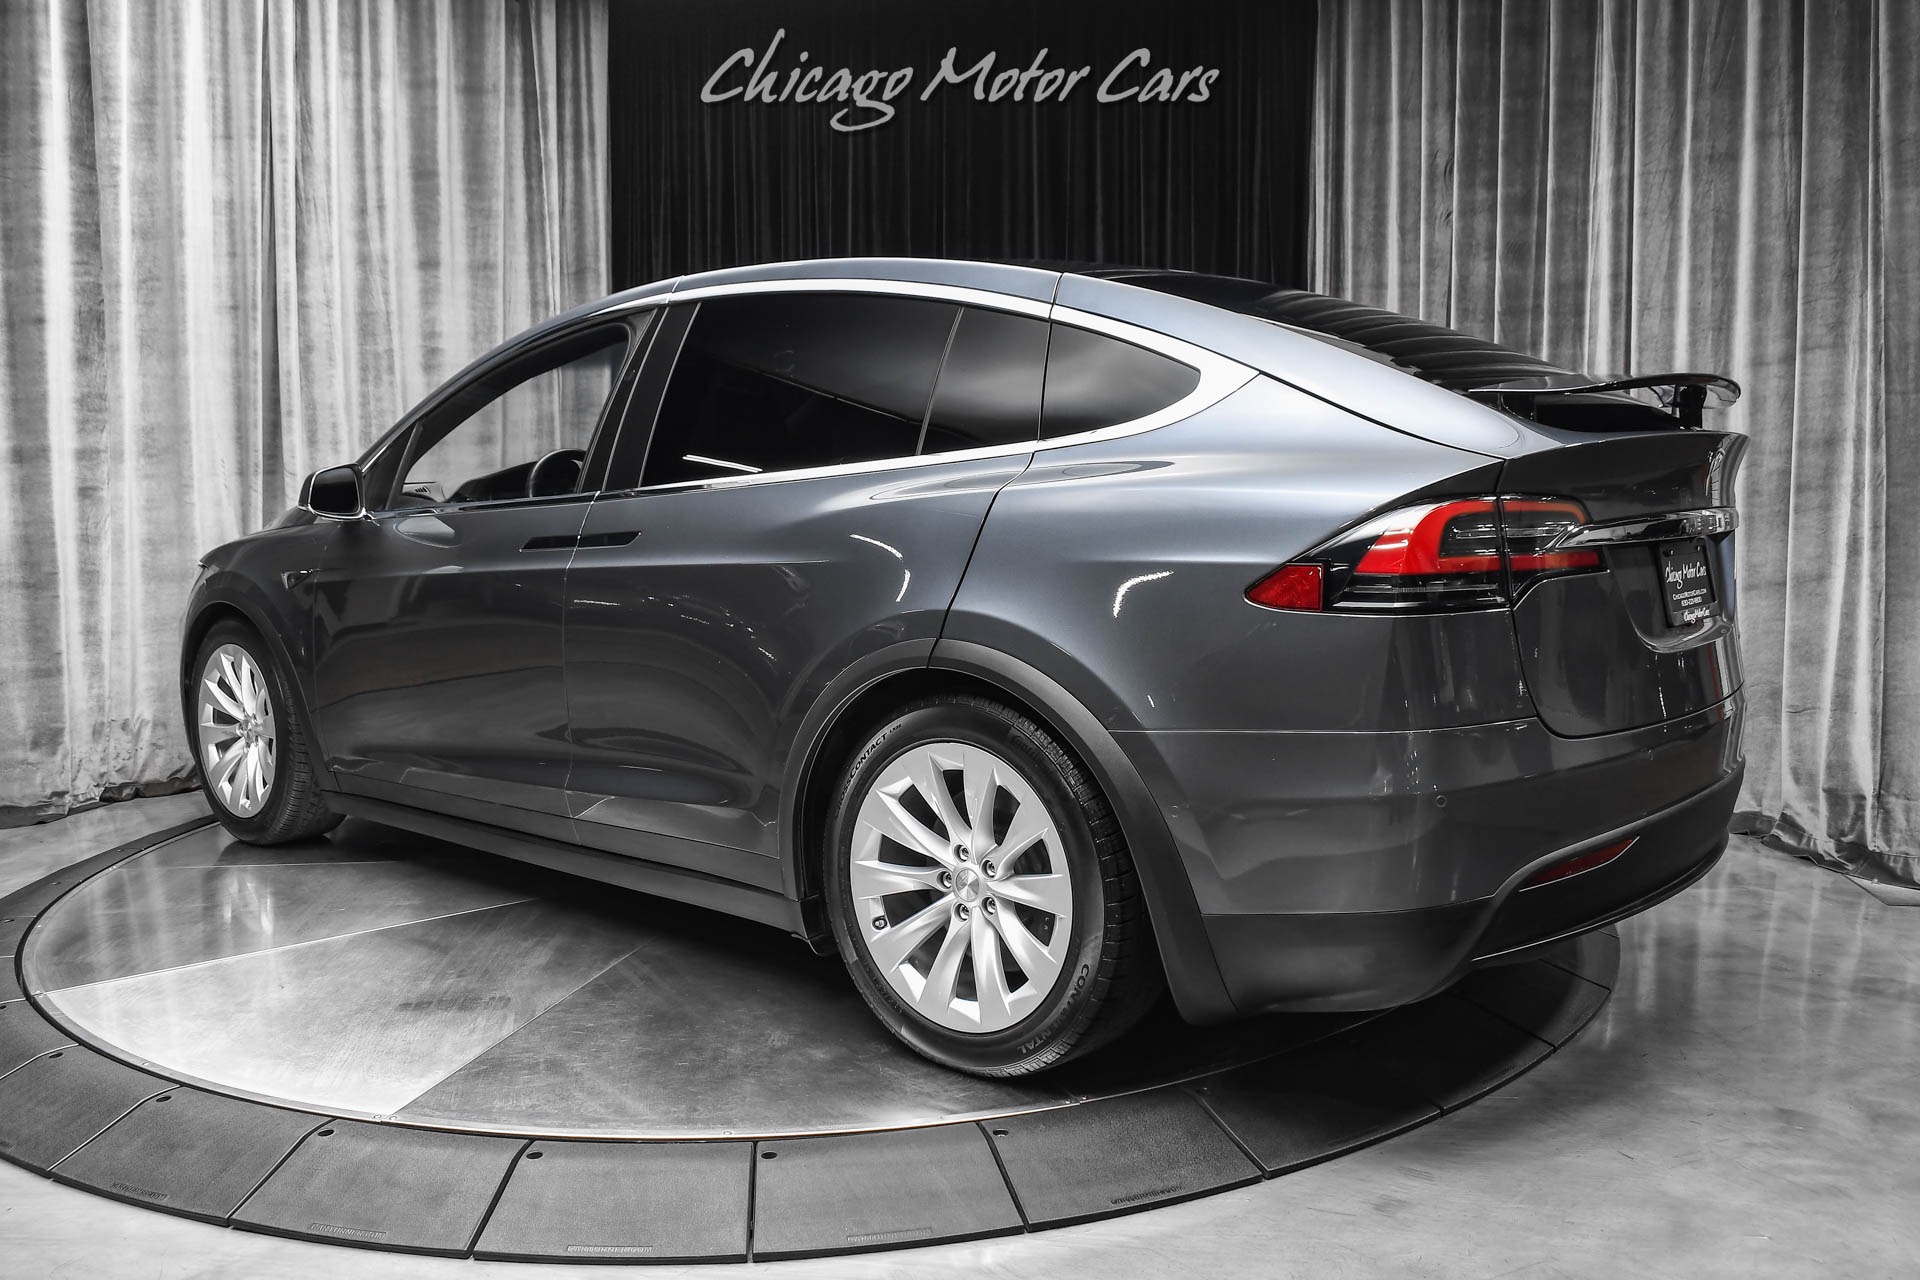 Used 2020 Tesla Model X Long Range Plus with VIN 5YJXCDE2XLF279972 for sale in West Chicago, IL